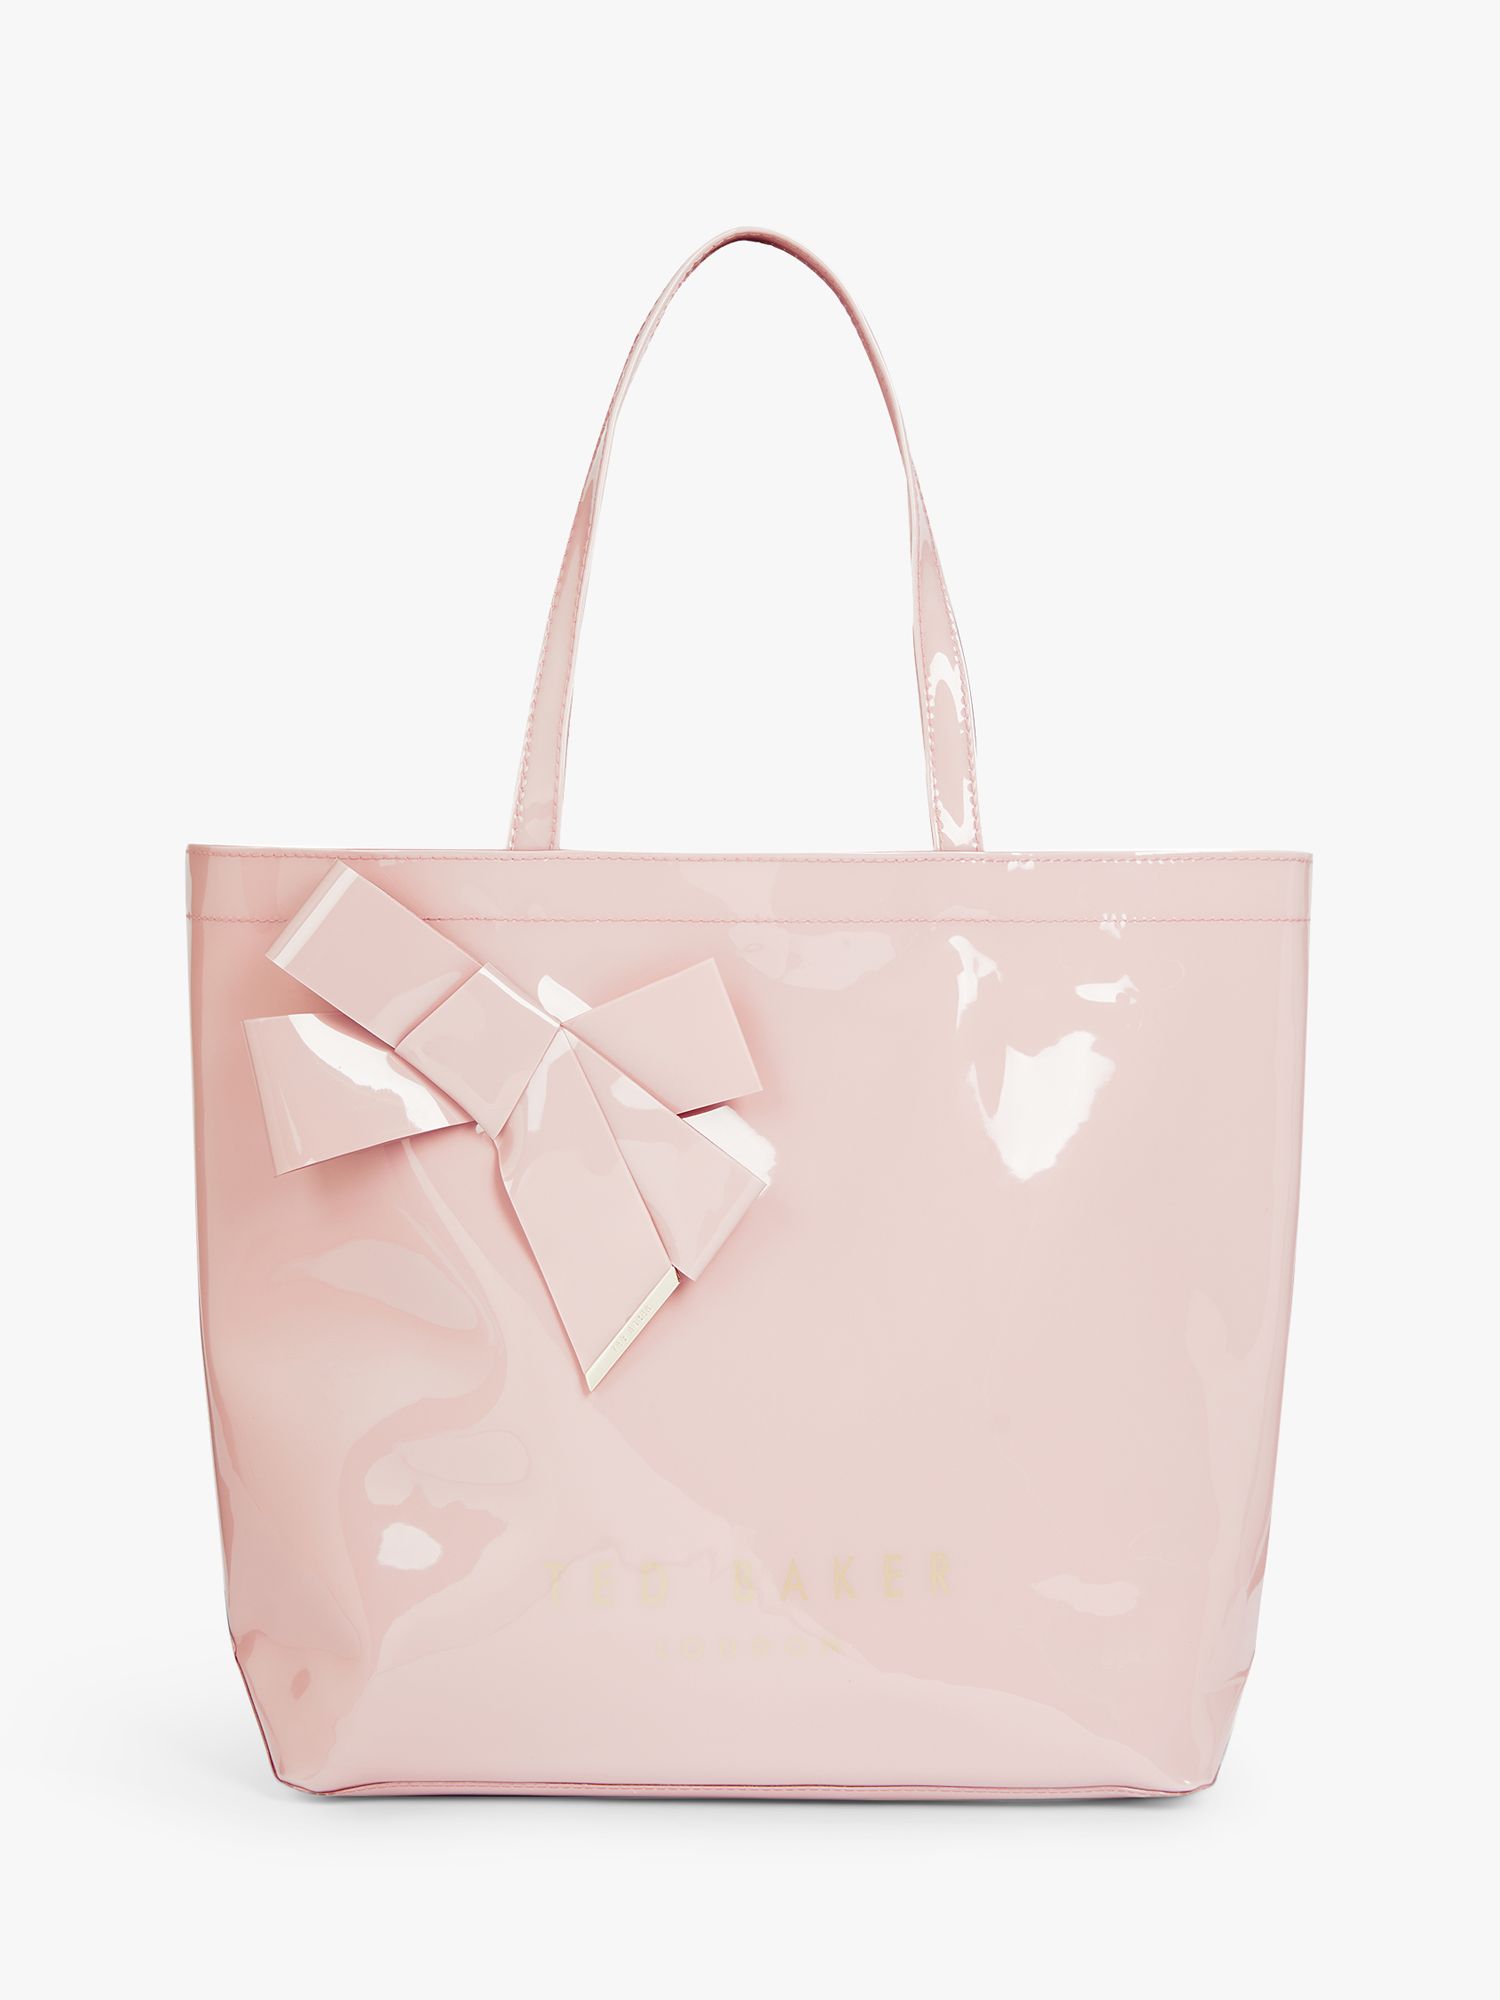 Ted Baker Rose Tote Bags